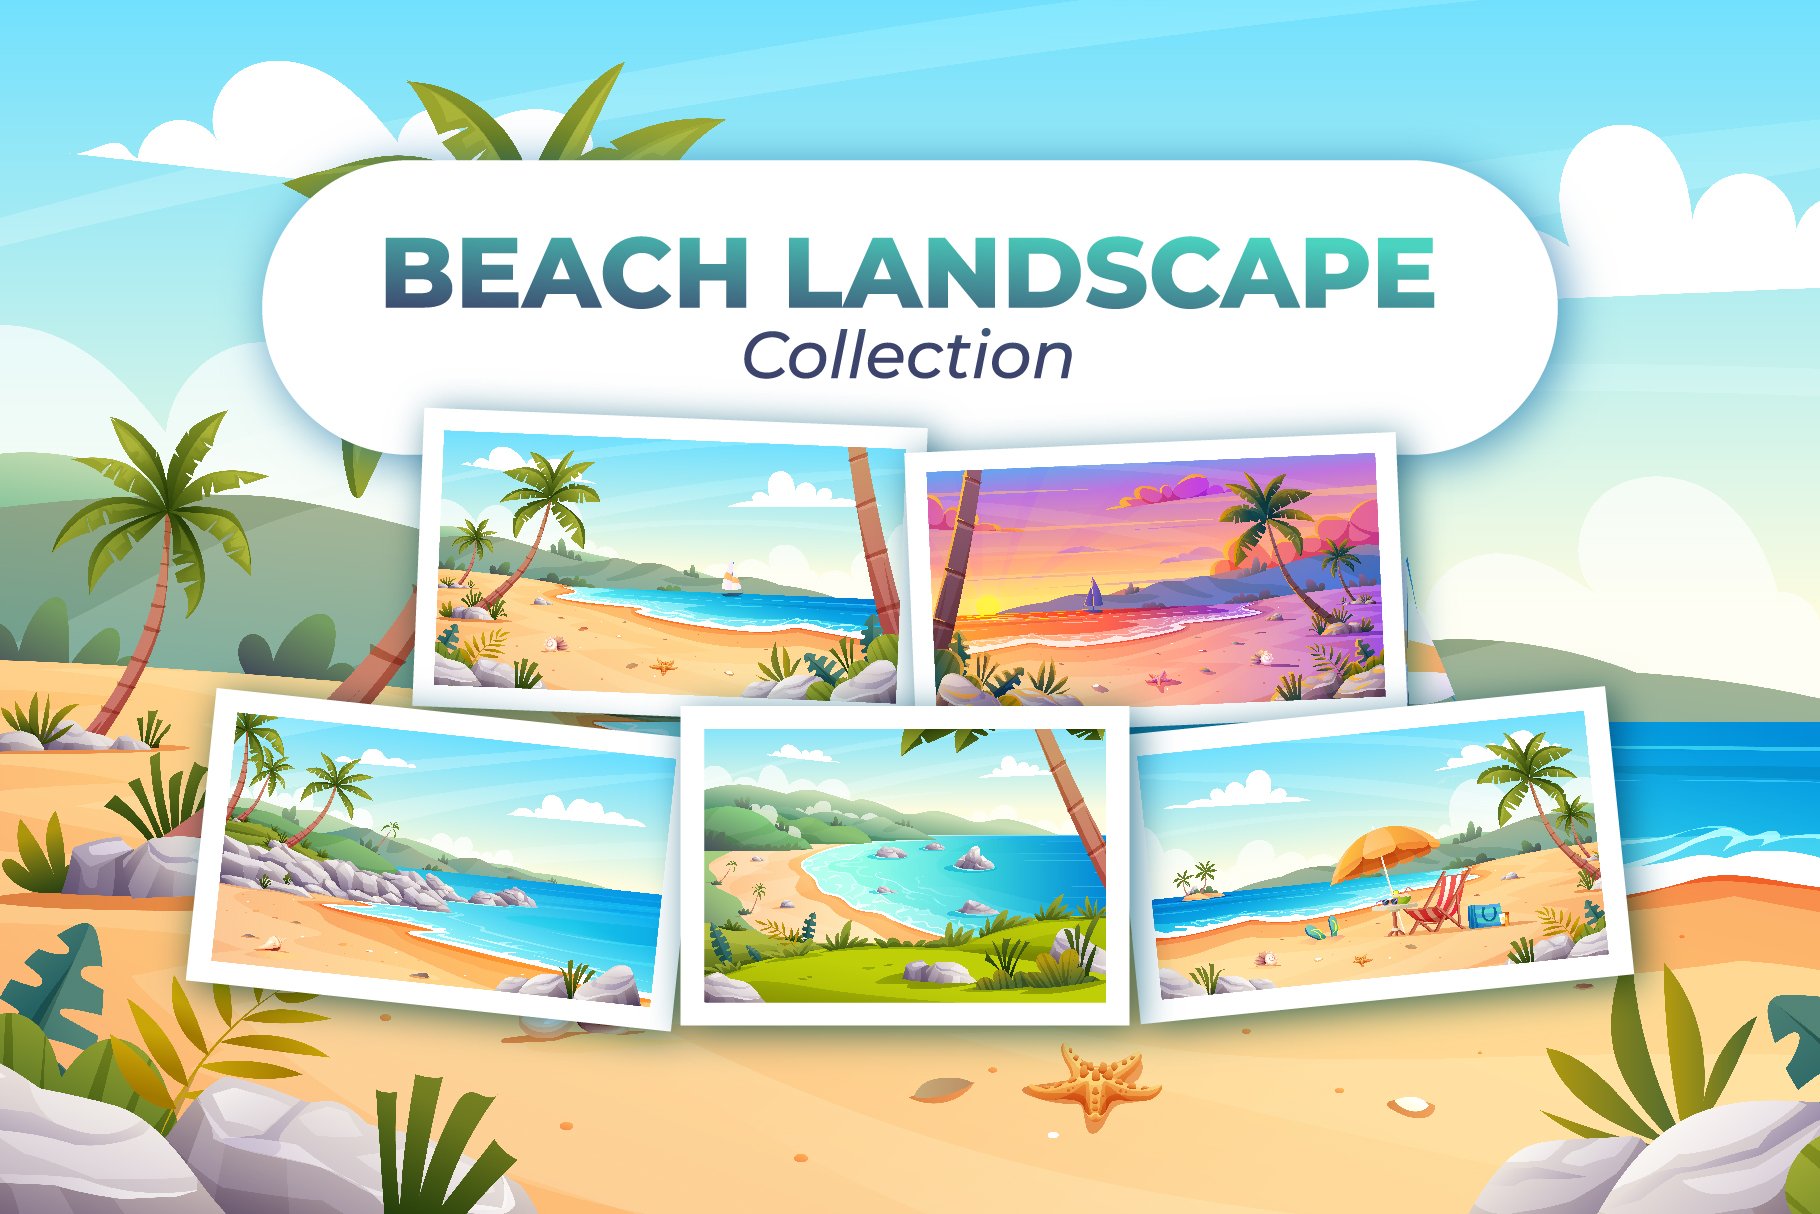 Beach Landscape Collection cover image.